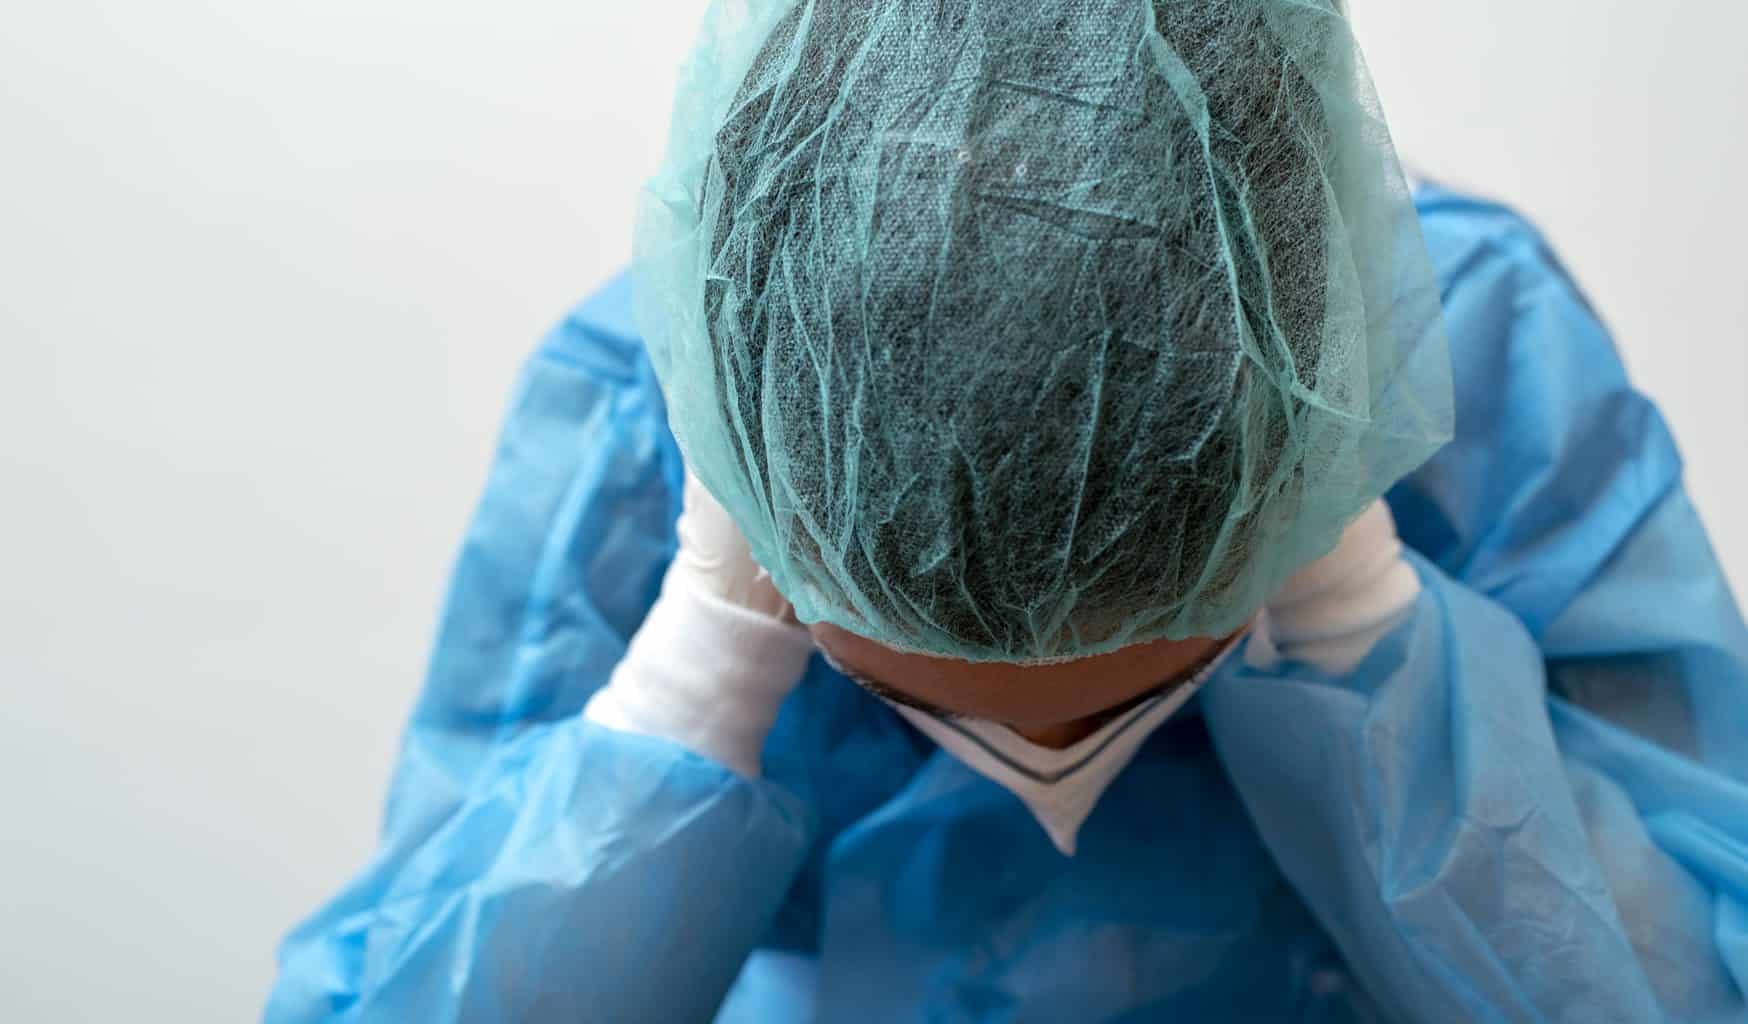 surgery provider with hair net and full scrubs leaning over